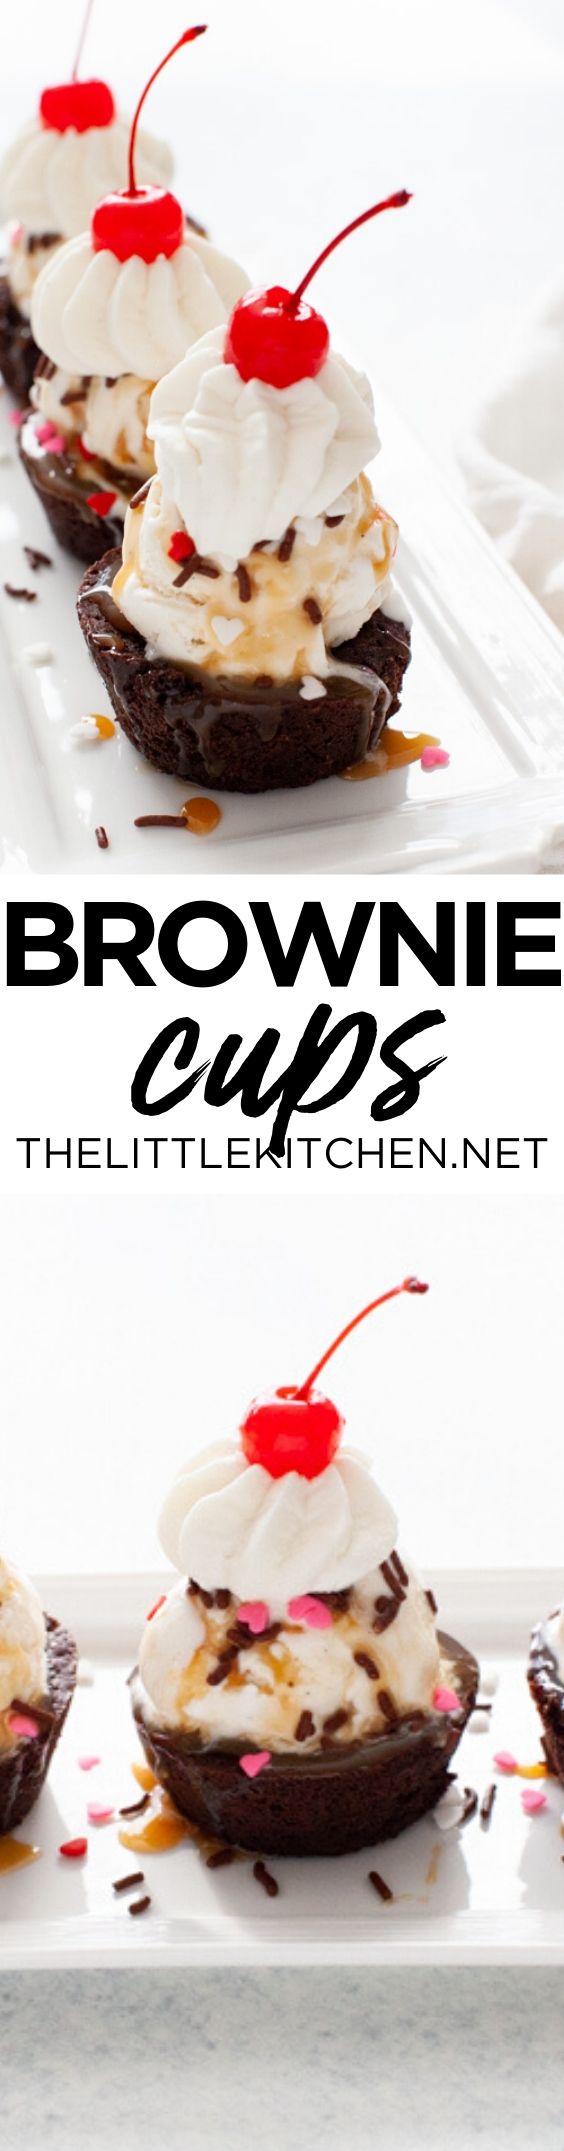 Brownie Cups from thelittlekitchen.net